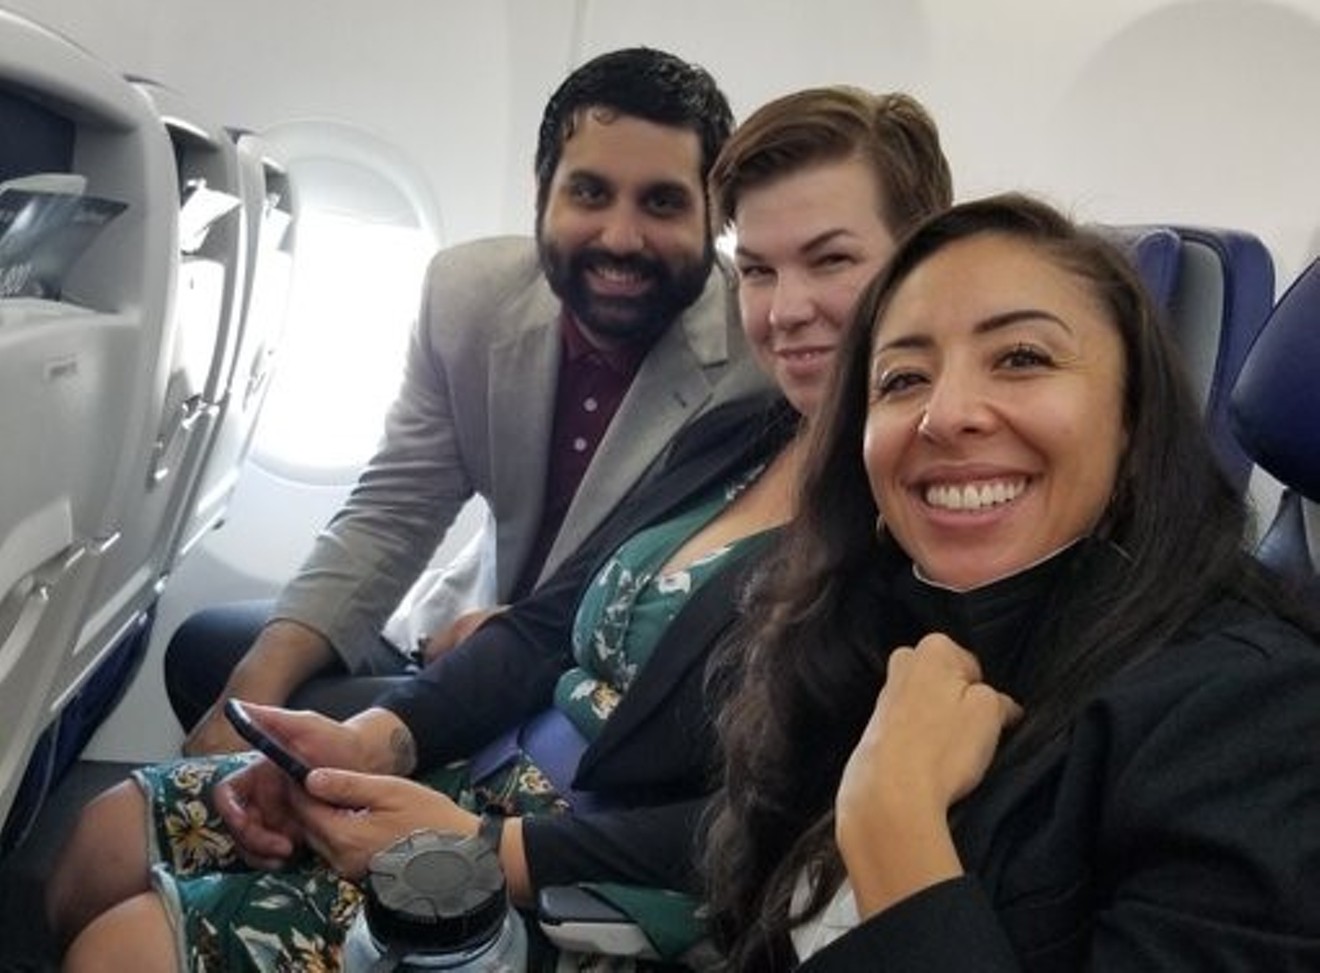 Juan Marcano, Alison Coombs and Candi CdeBaca traveled to Houston on a fact-finding mission.